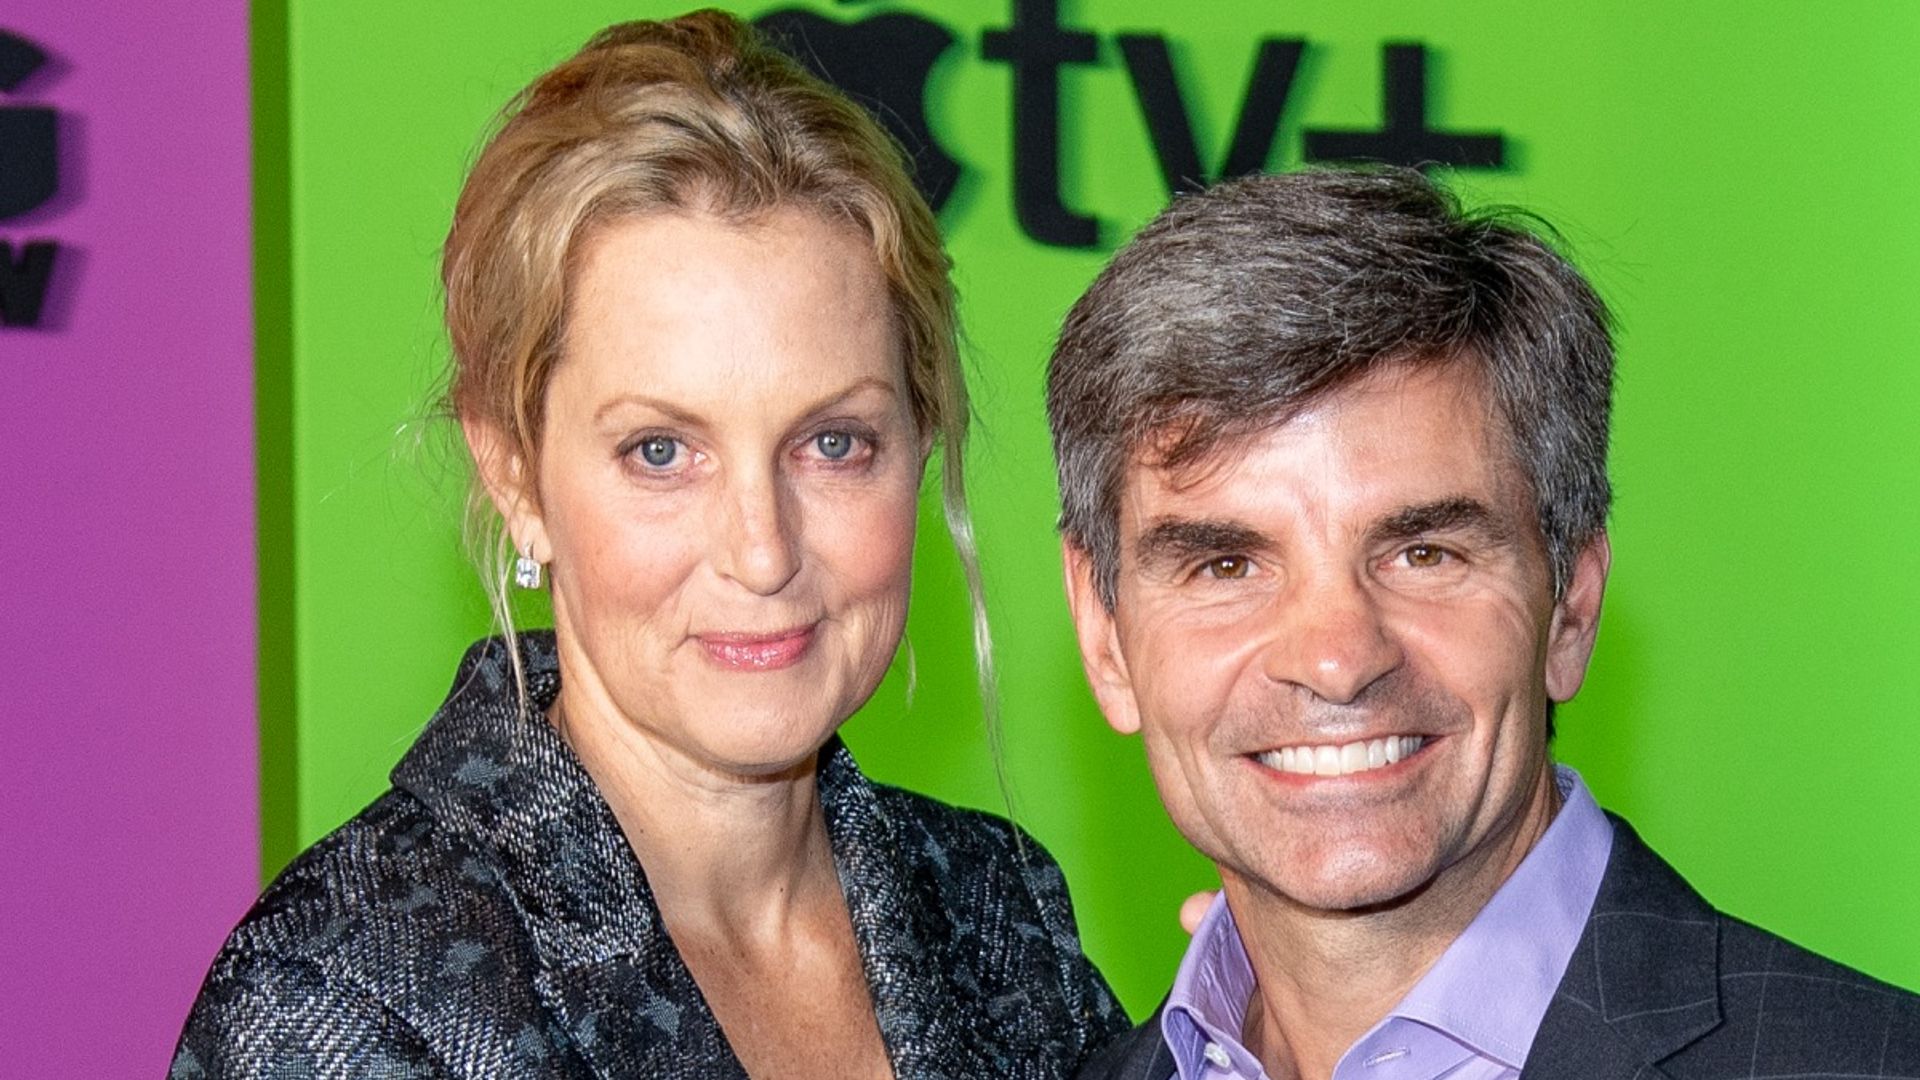 George Stephanopoulos returns to social media in support of wife Ali Wentworth